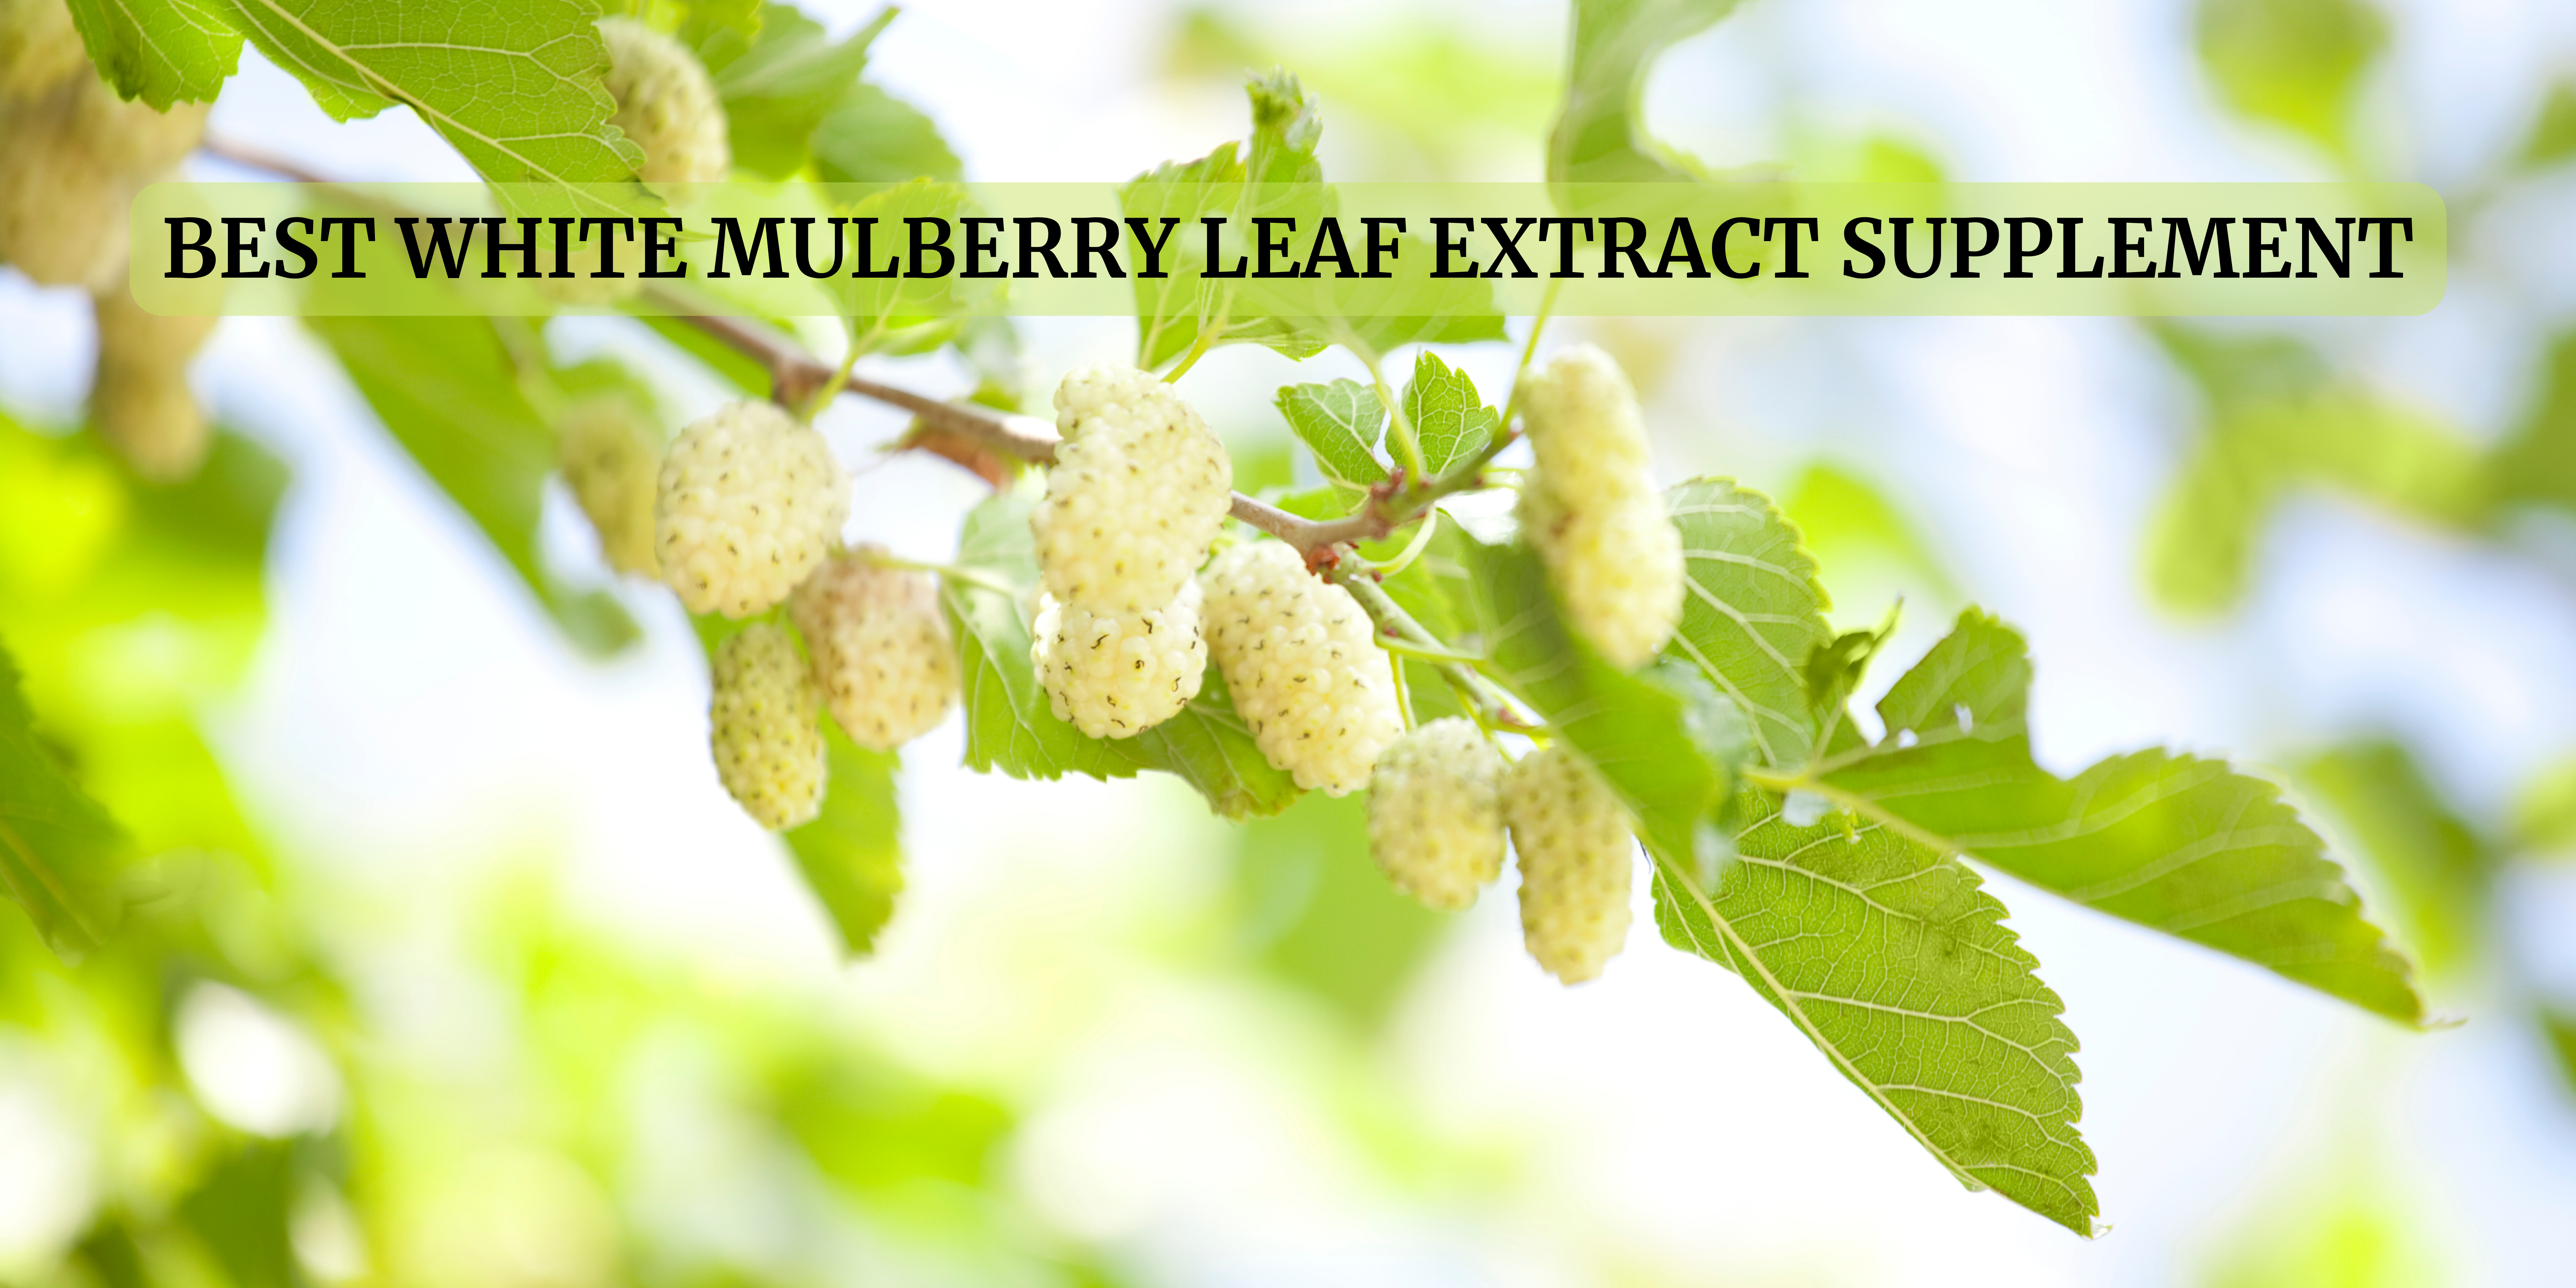 white mulberry leaf extract supplement in Australia